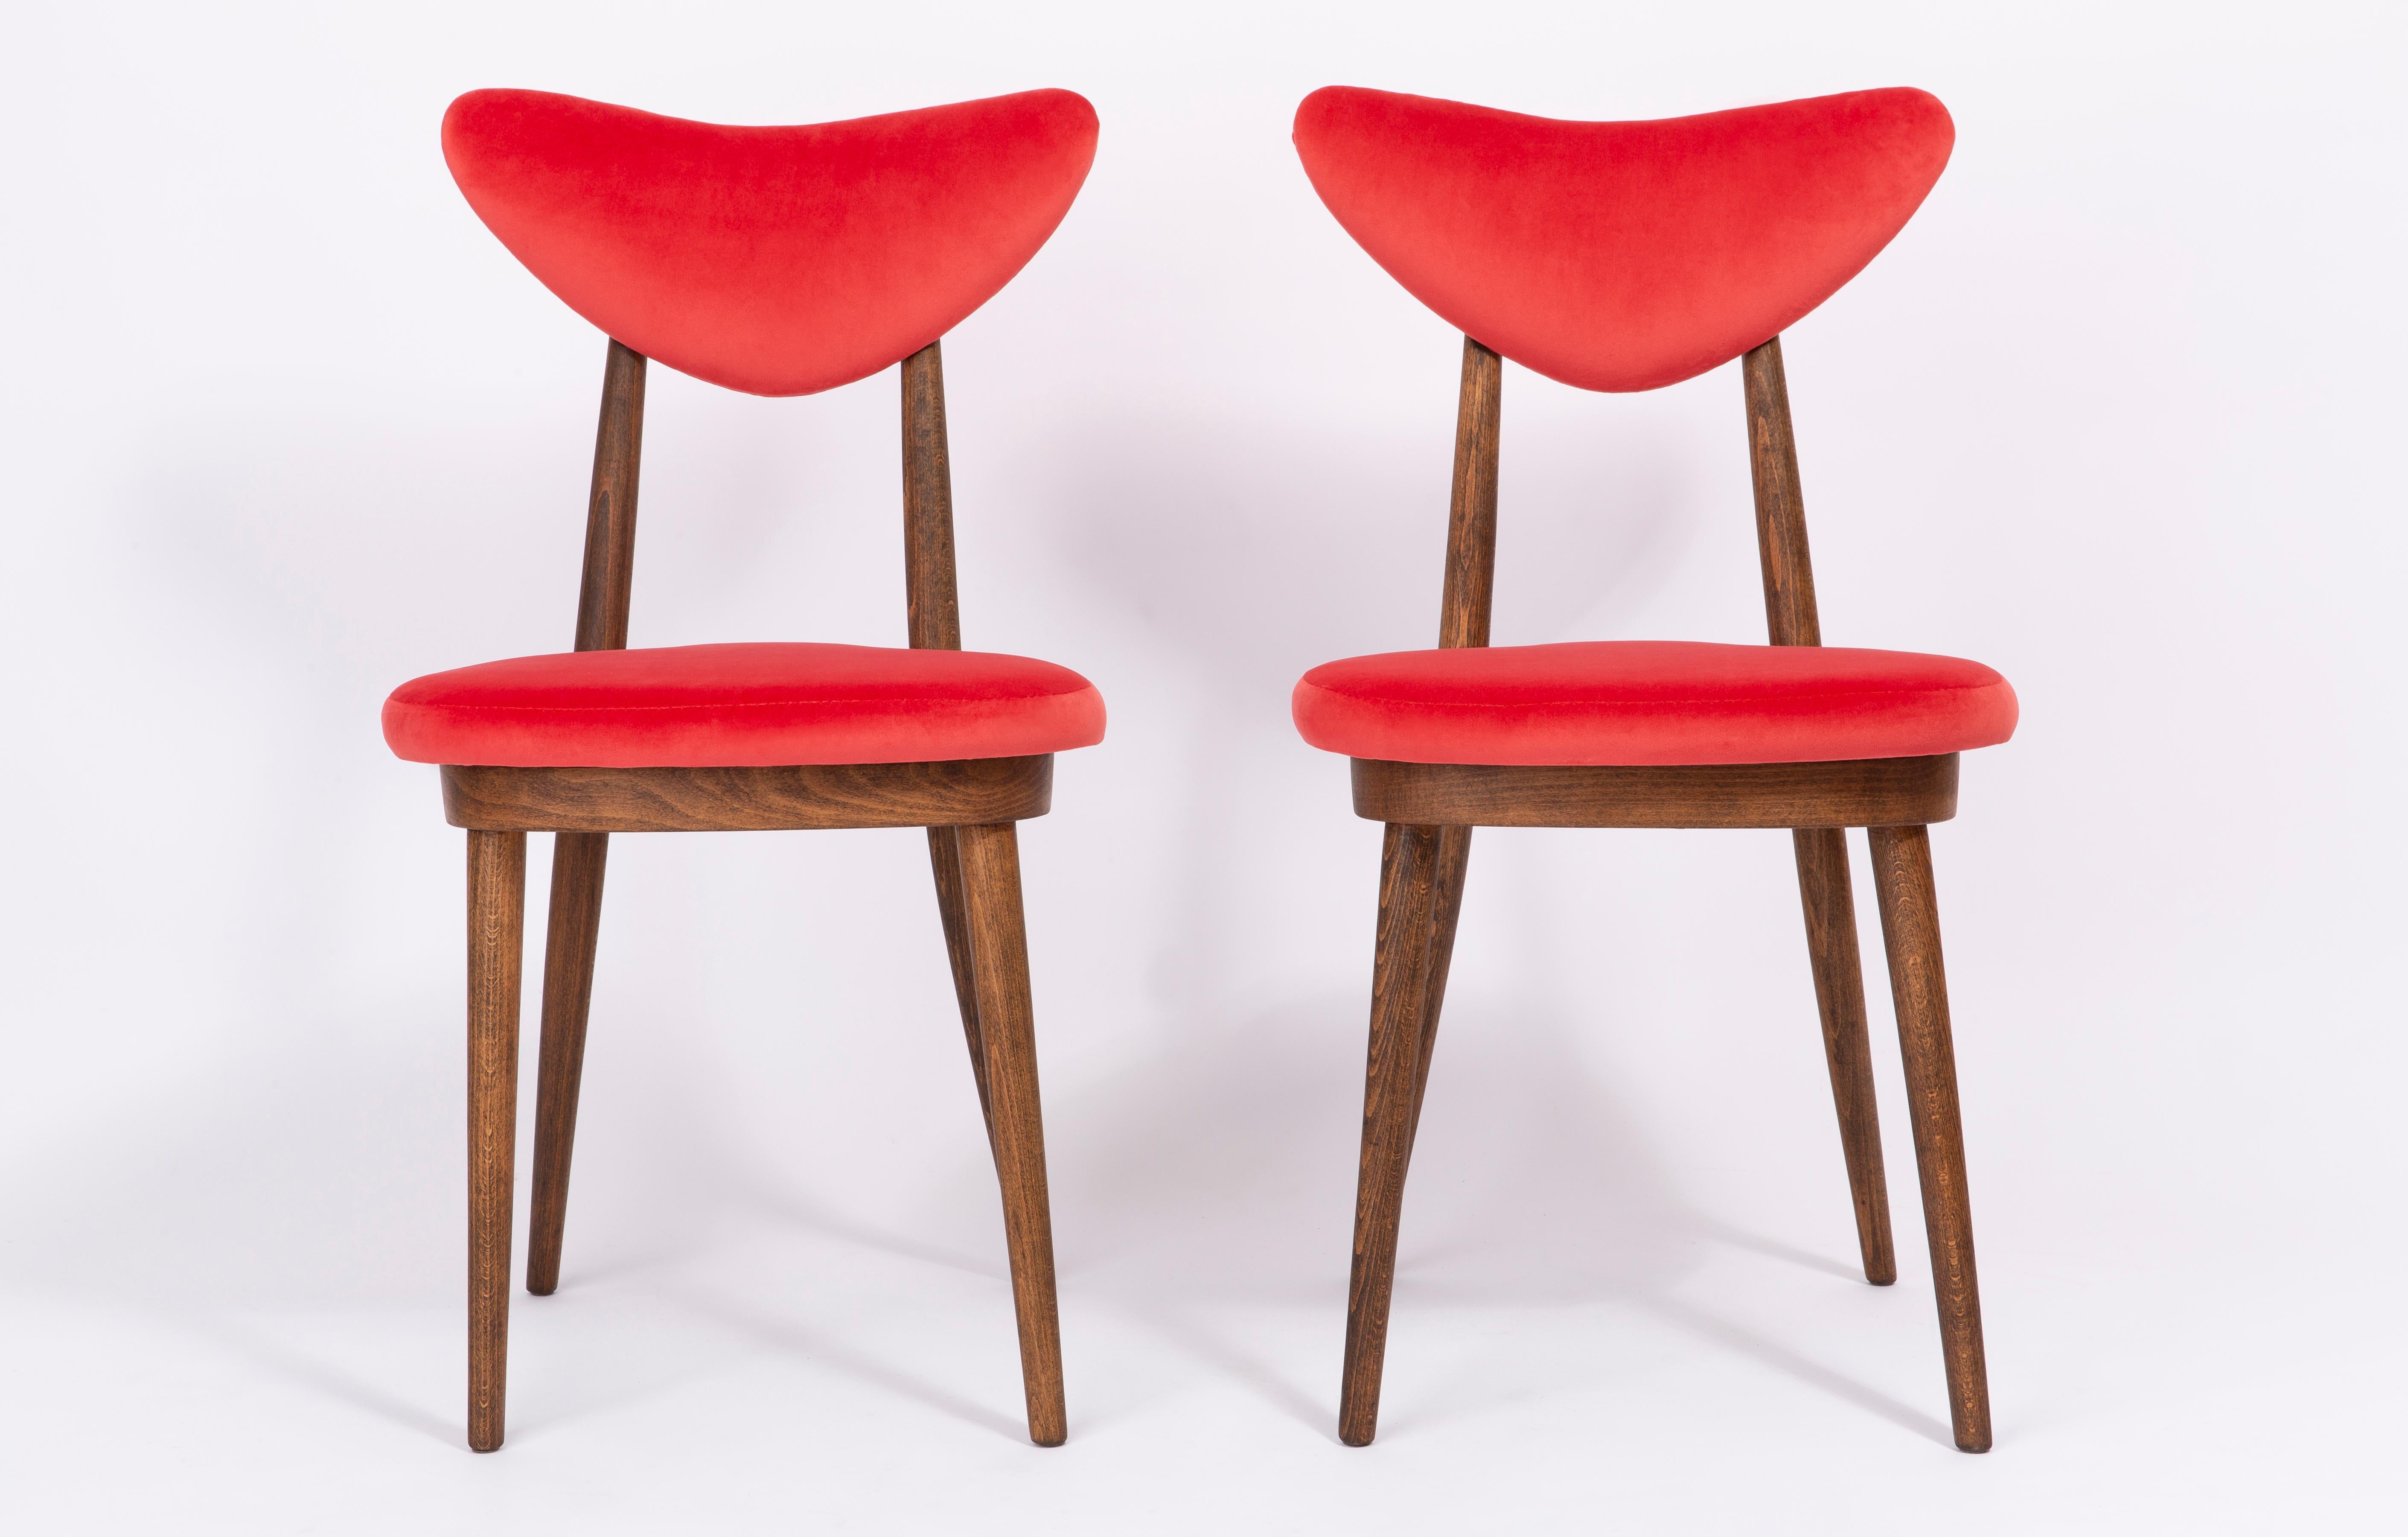 Hand-Crafted Set of Four Red Heart Chairs, Poland, 1960s For Sale